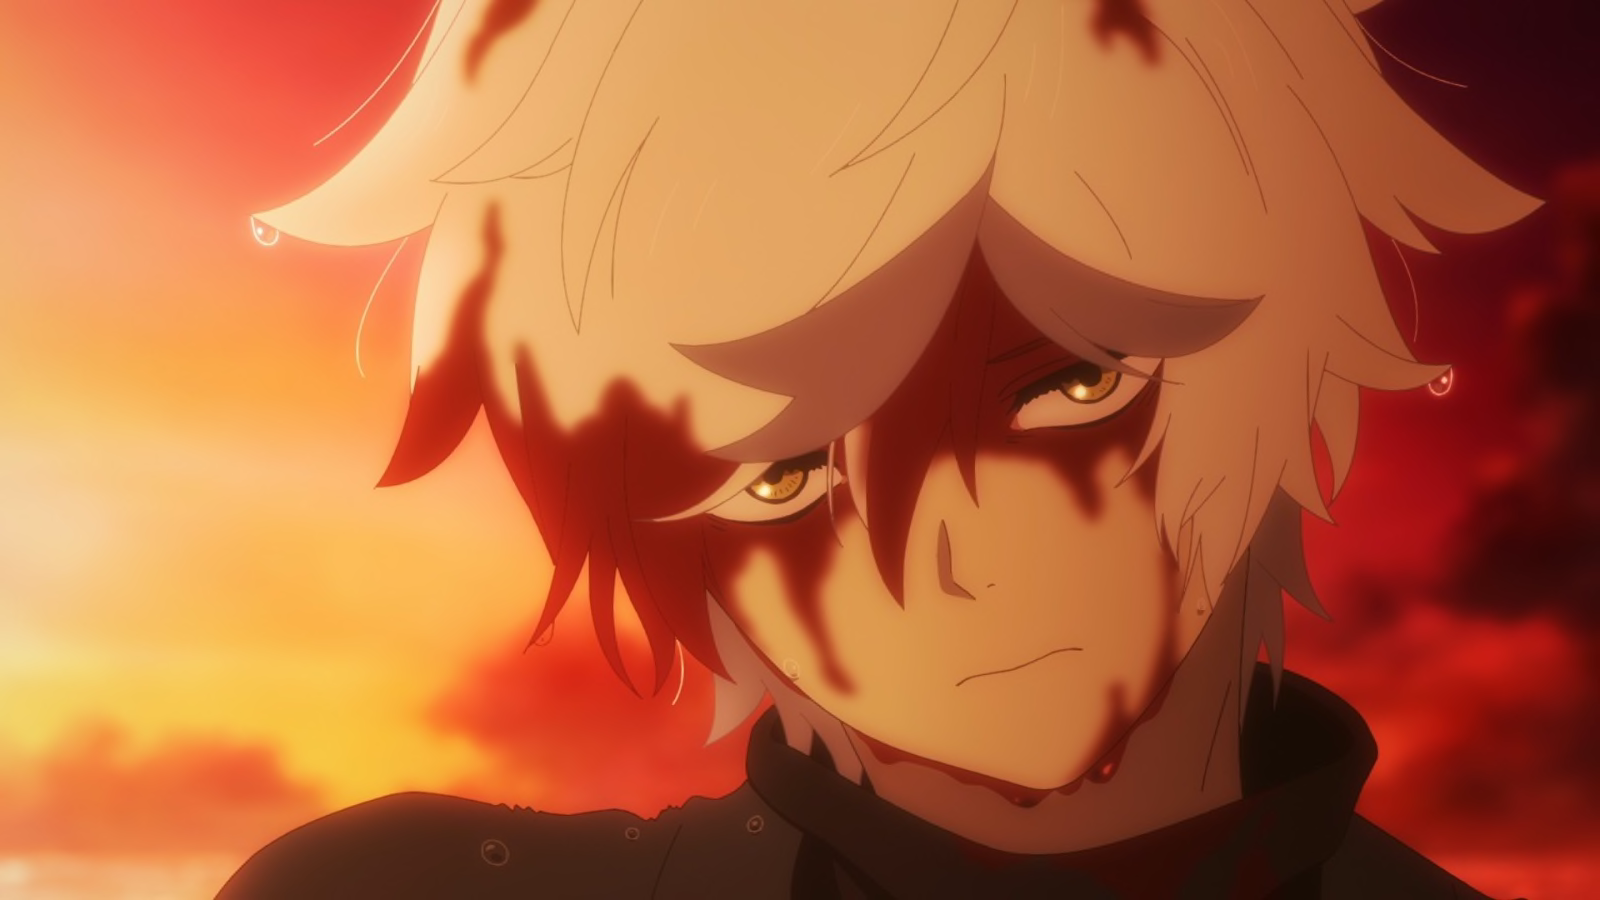 Hell's Paradise episode 9 preview hints at a Lord Tensen meeting